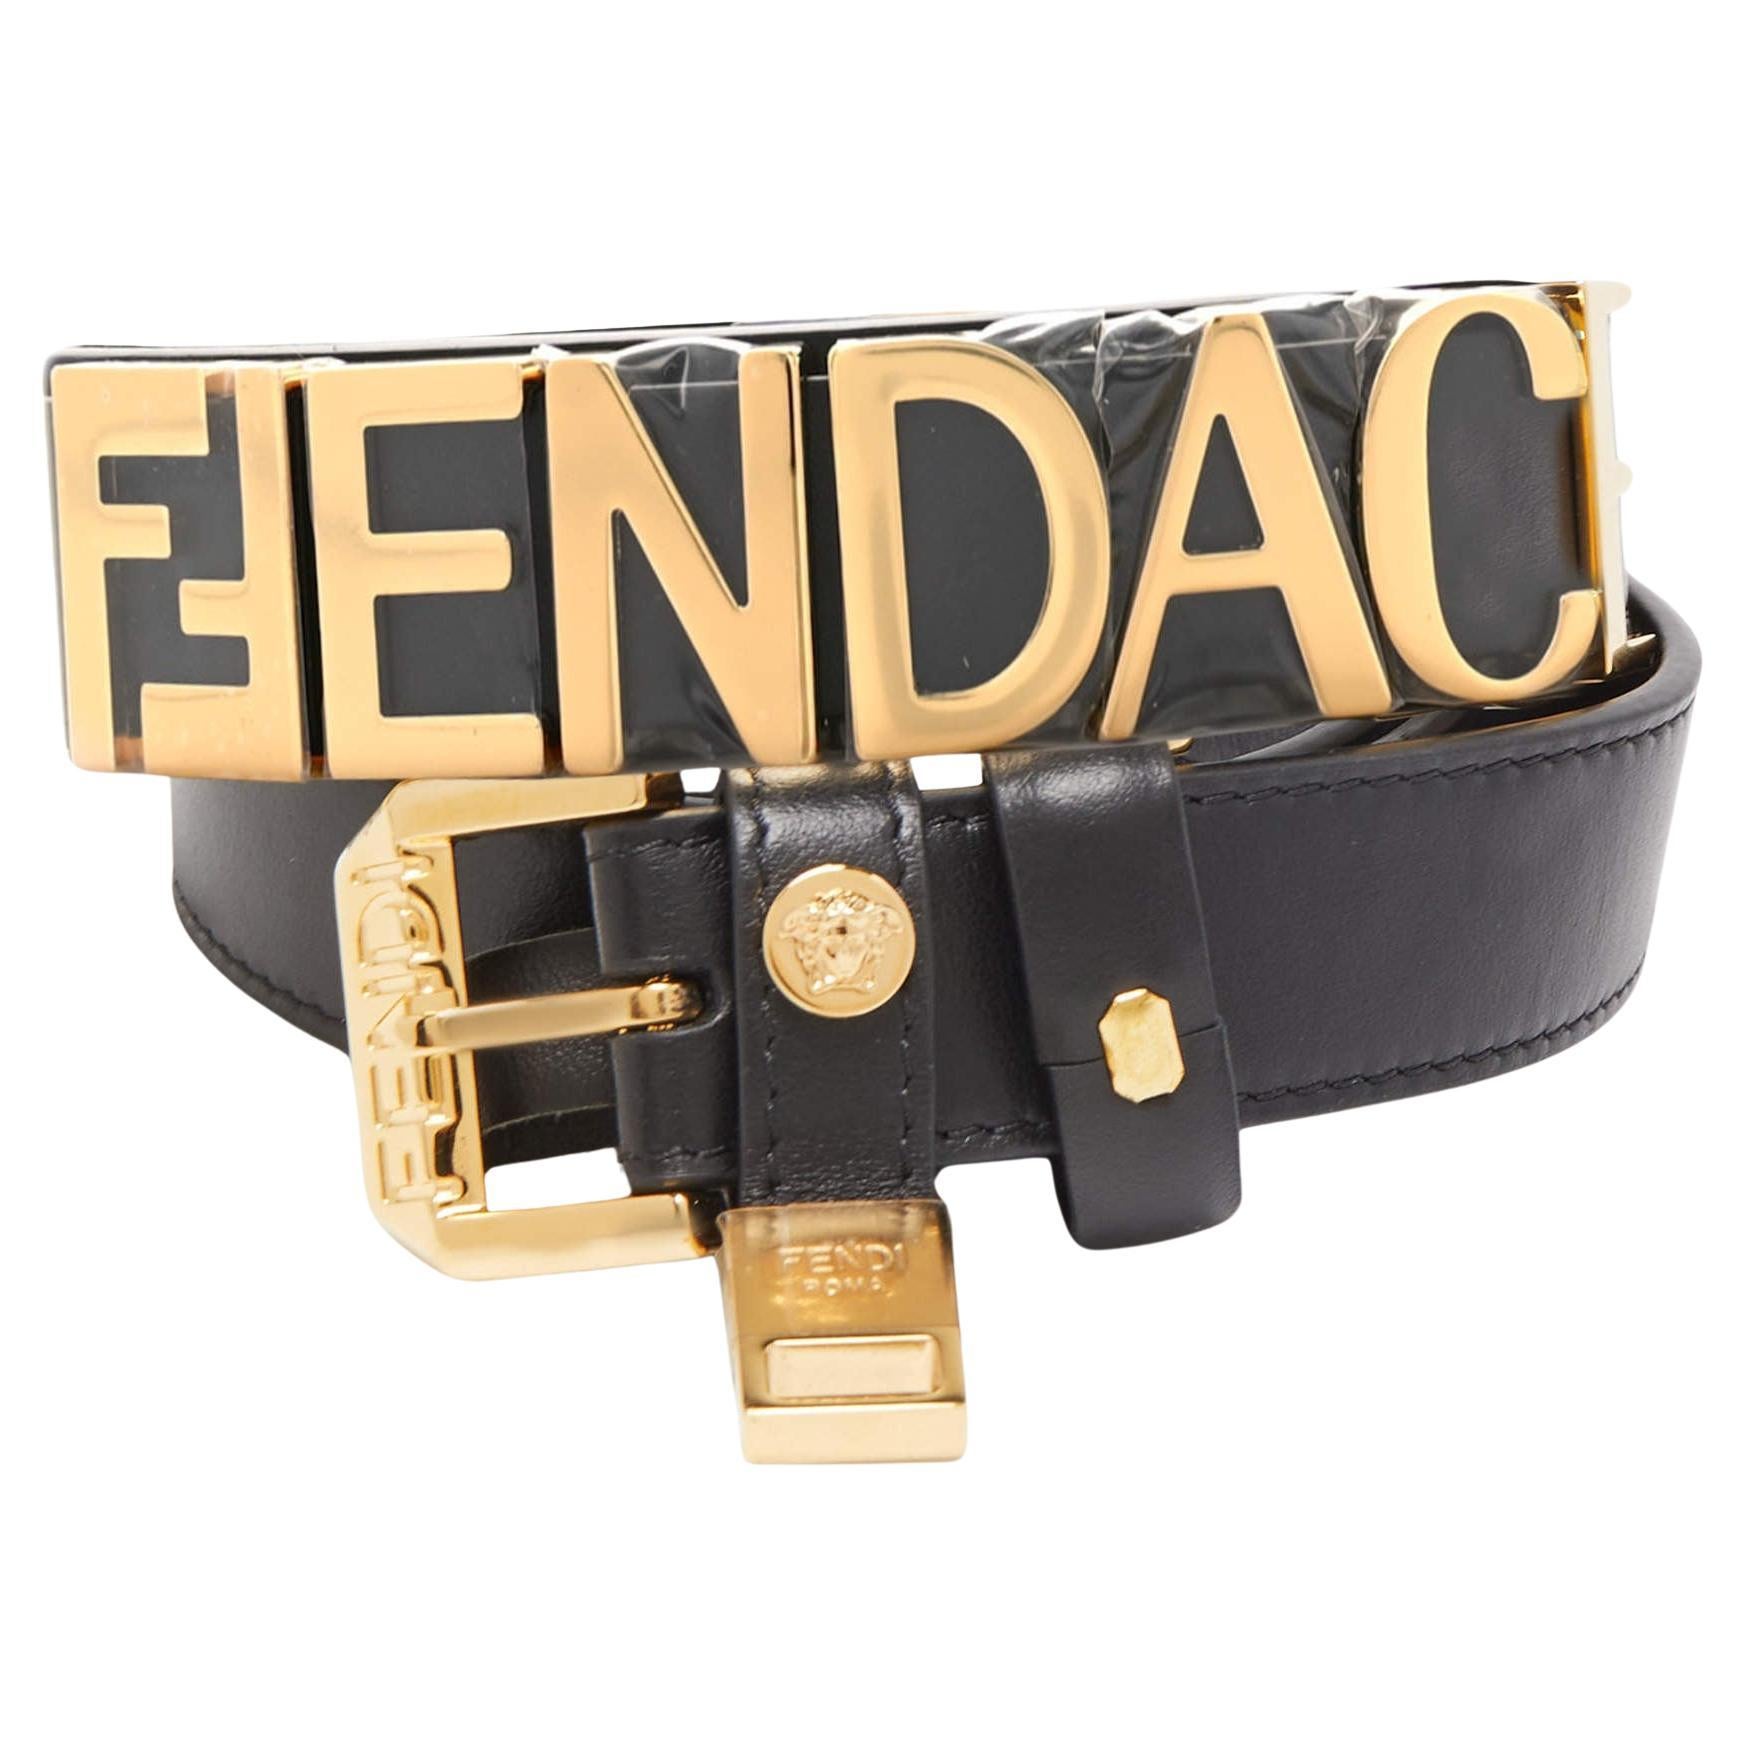 Do Fendi belts have serial numbers?